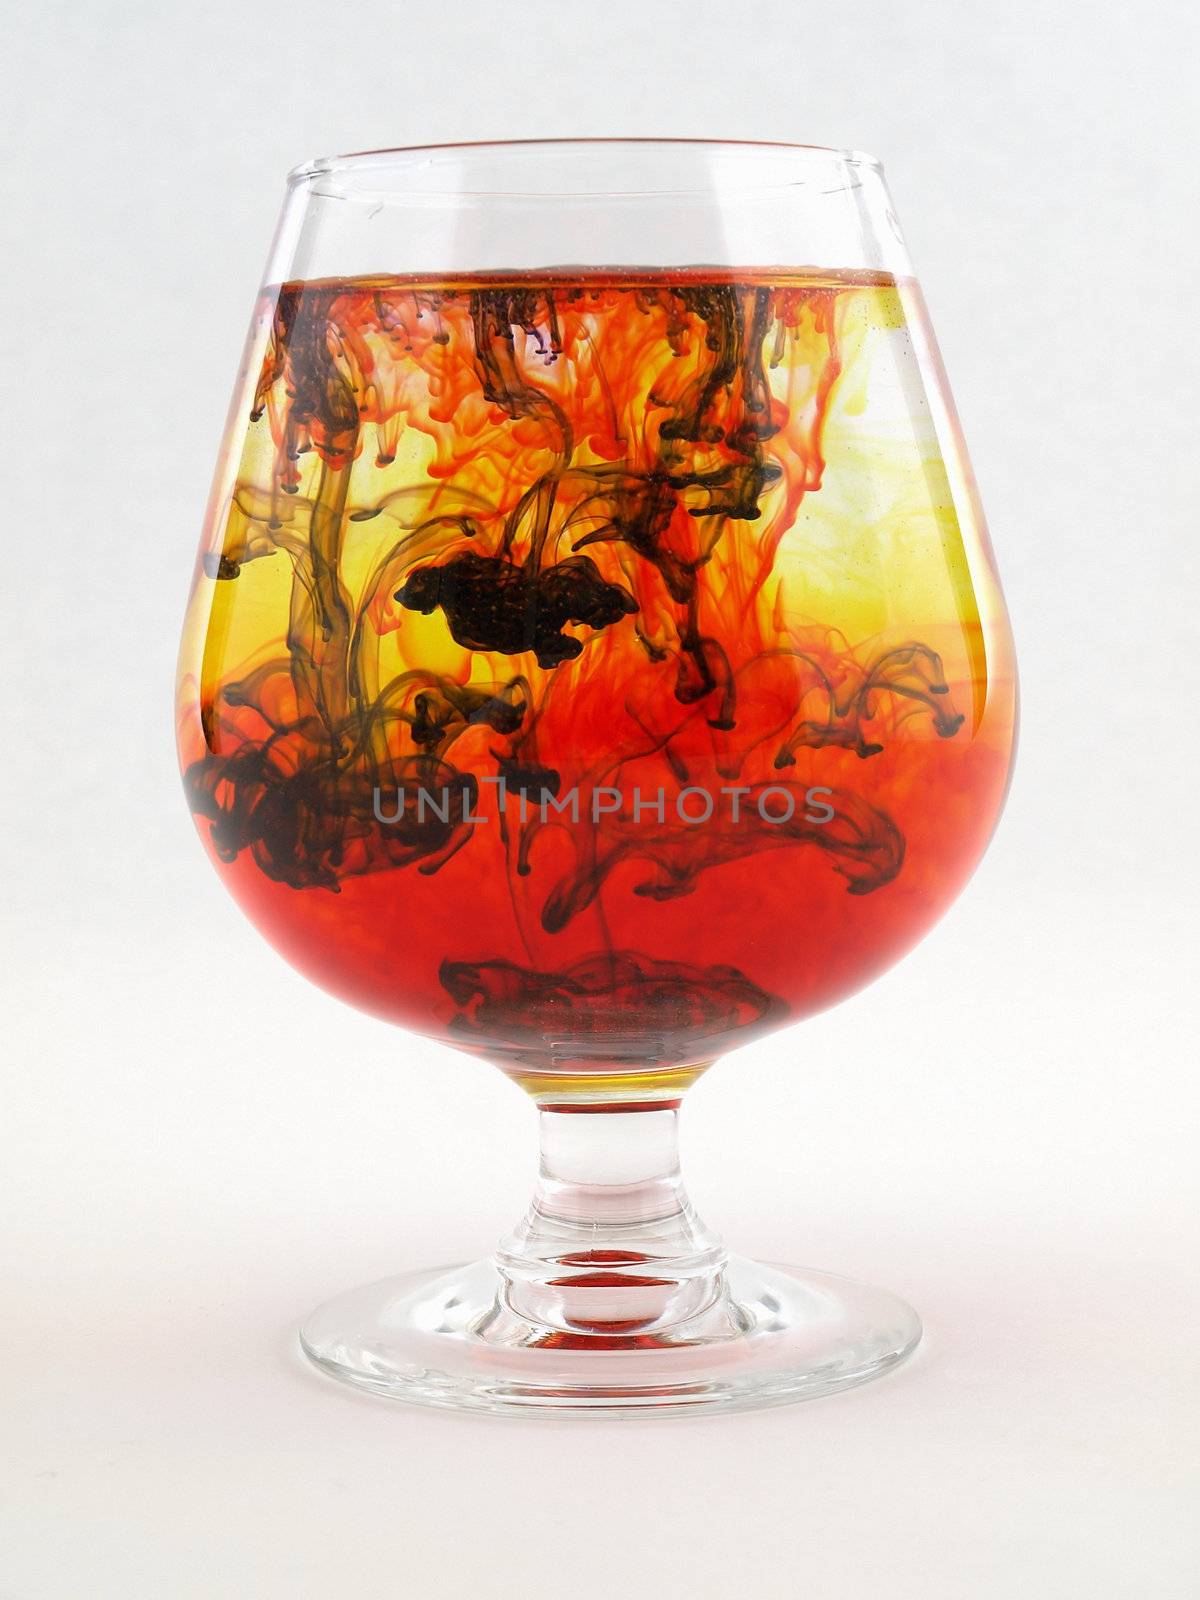 A liquid filled glass with black, red and yellow swirls over a white background.